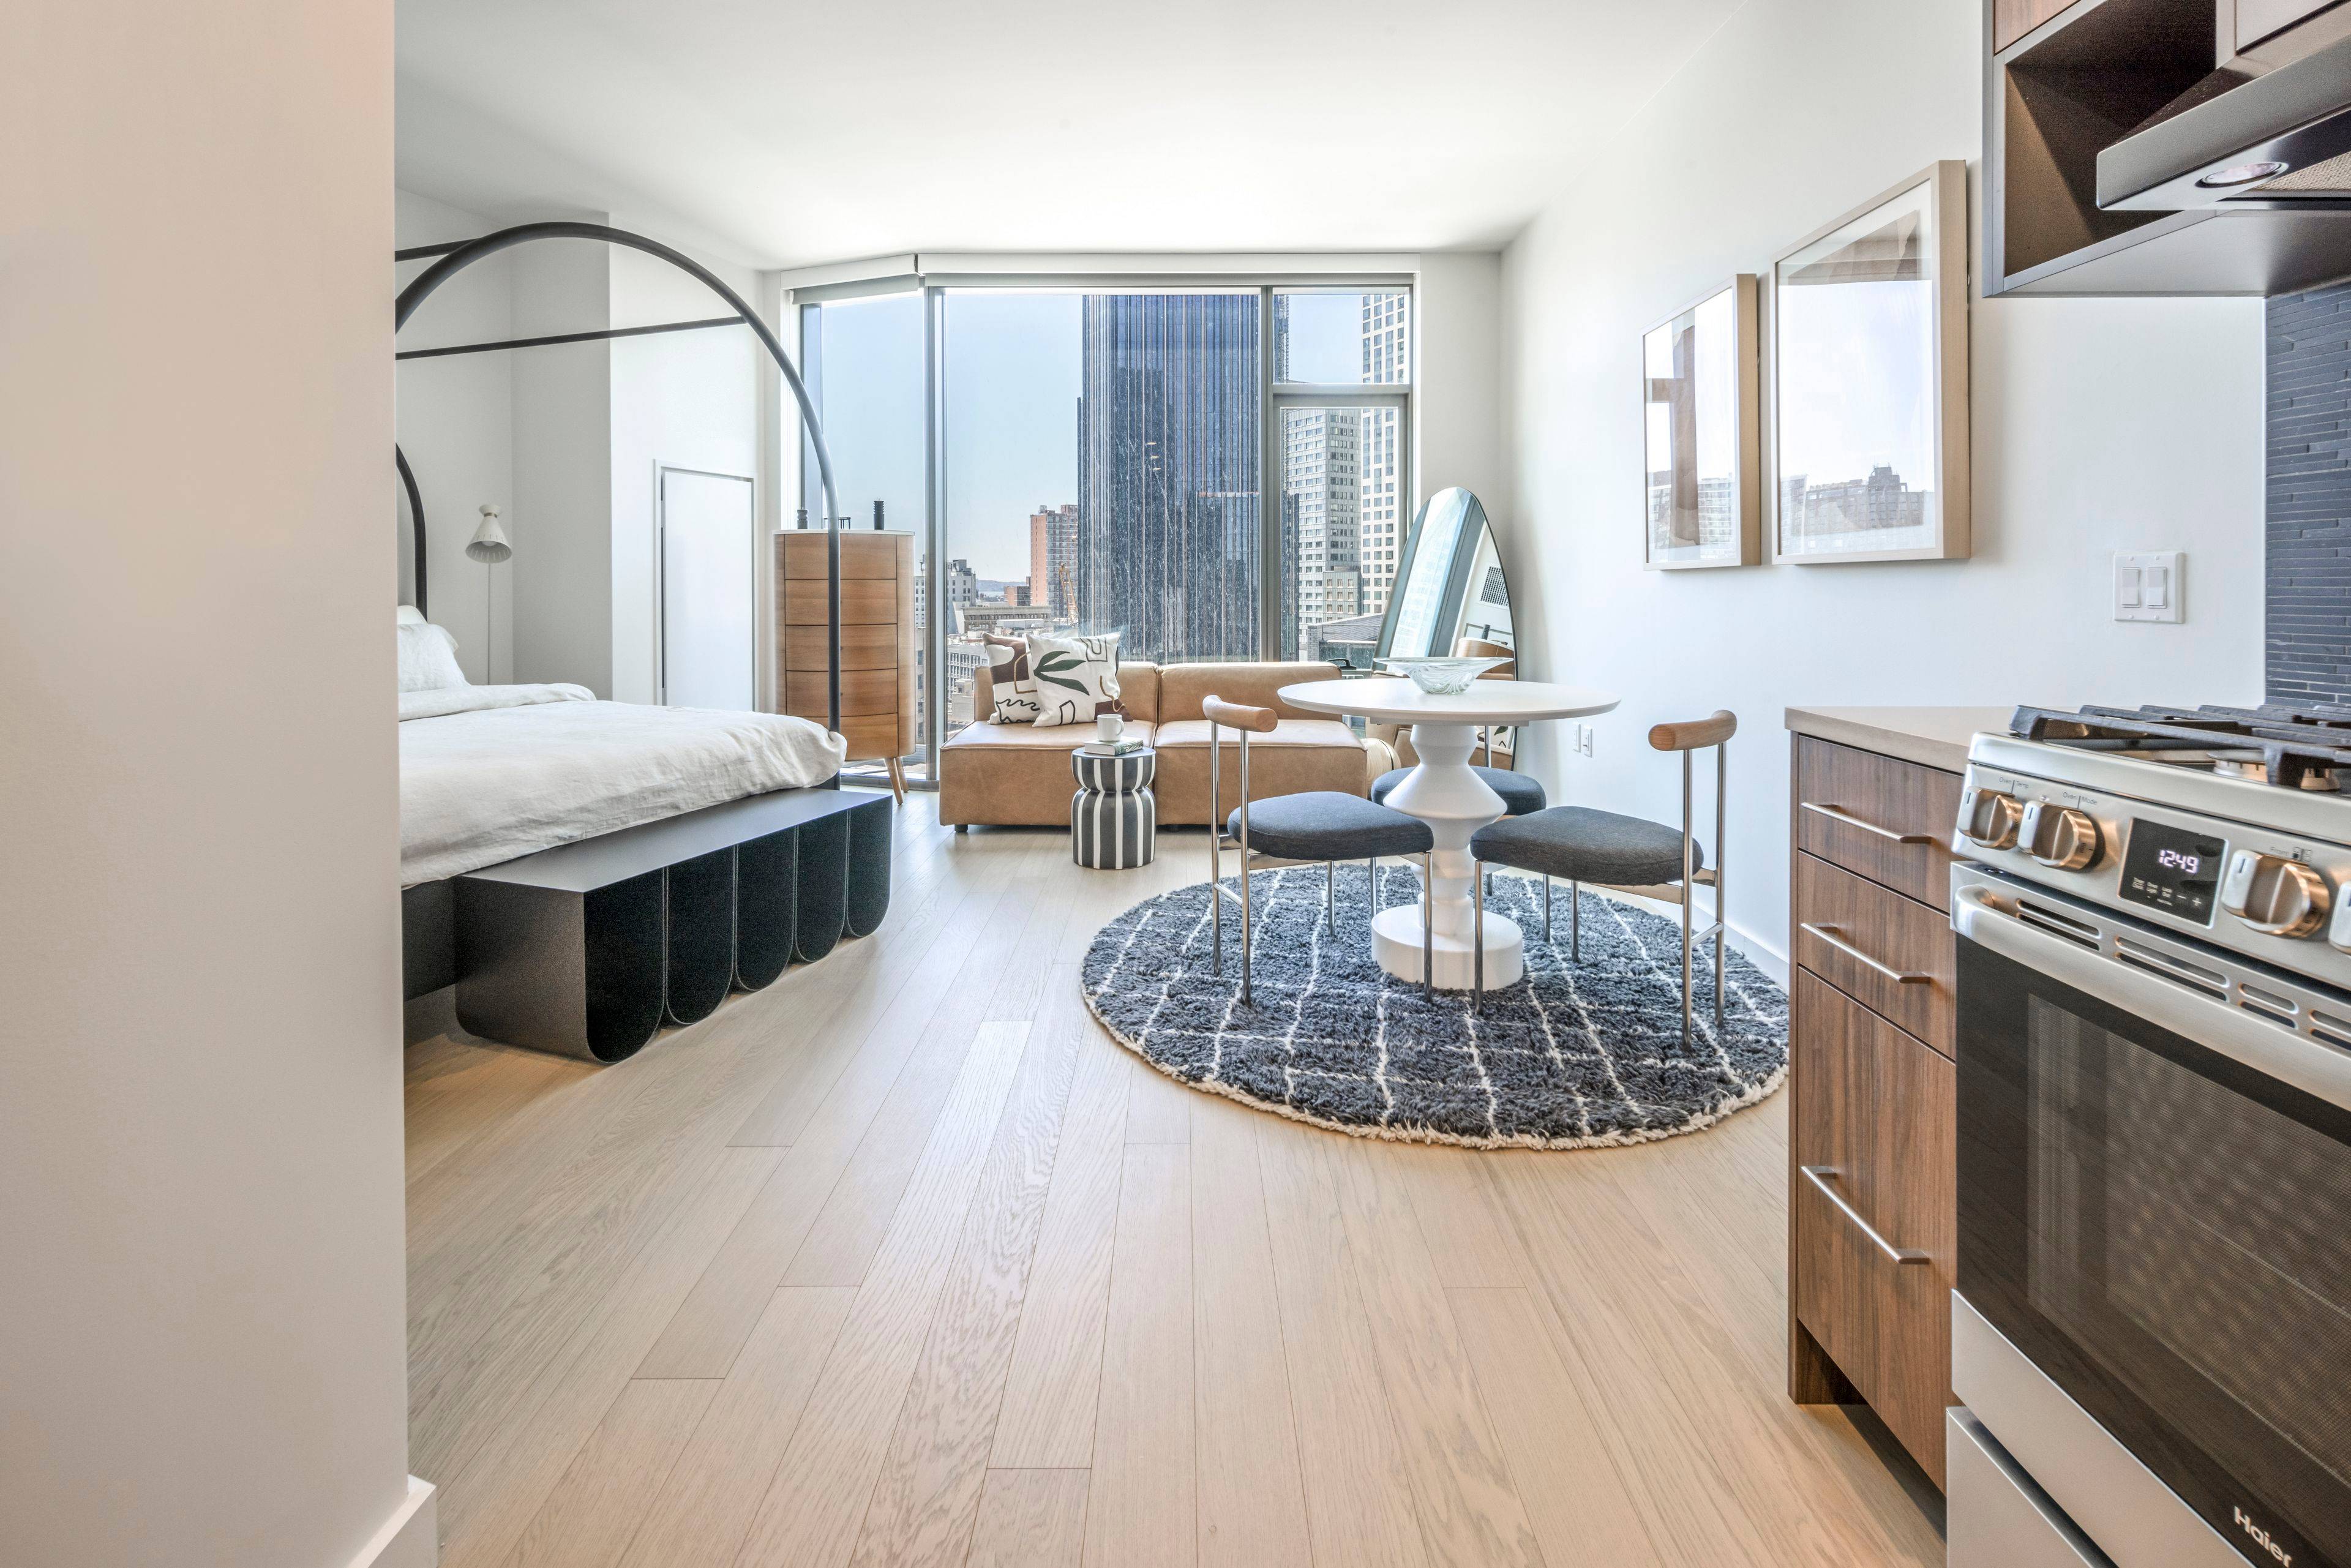 The Willoughby makes a definitive mark on the burgeoning Brooklyn skyline as it sets a new standard of living in an ideal location that epitomizes both convenience and character.